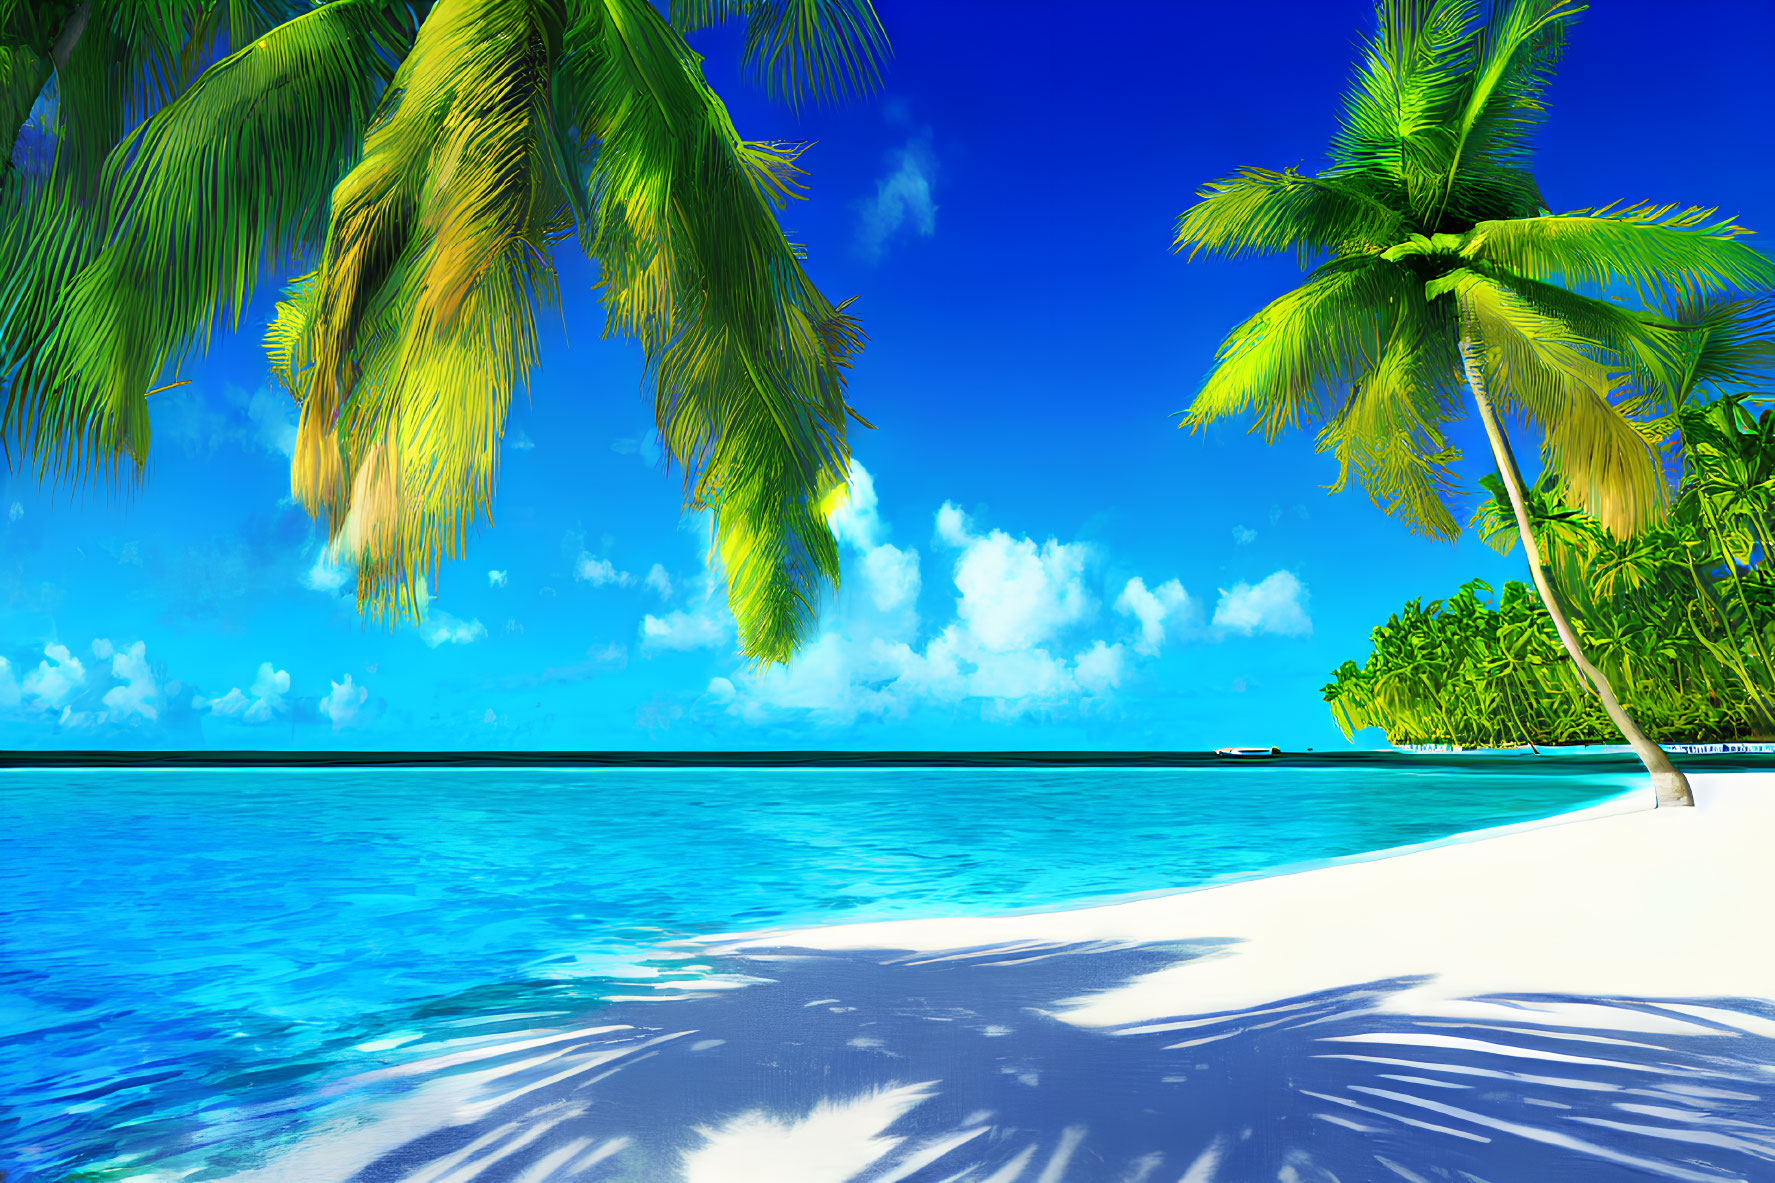 Tropical Beach Scene with Palm Trees and Turquoise Water